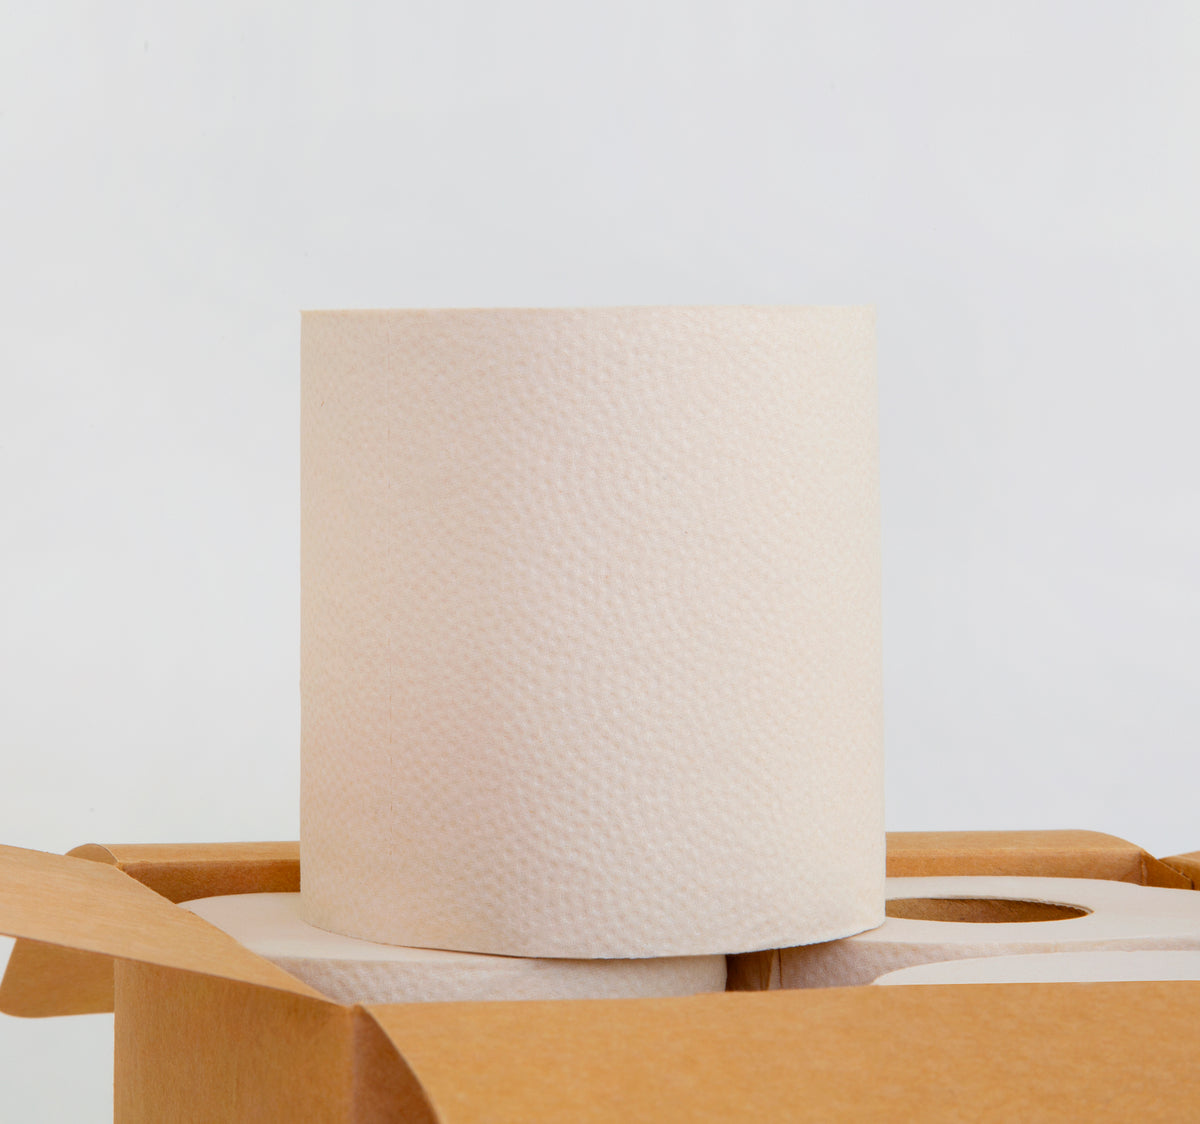 One roll of bamboo toilet paper on top of a box of toilet paper